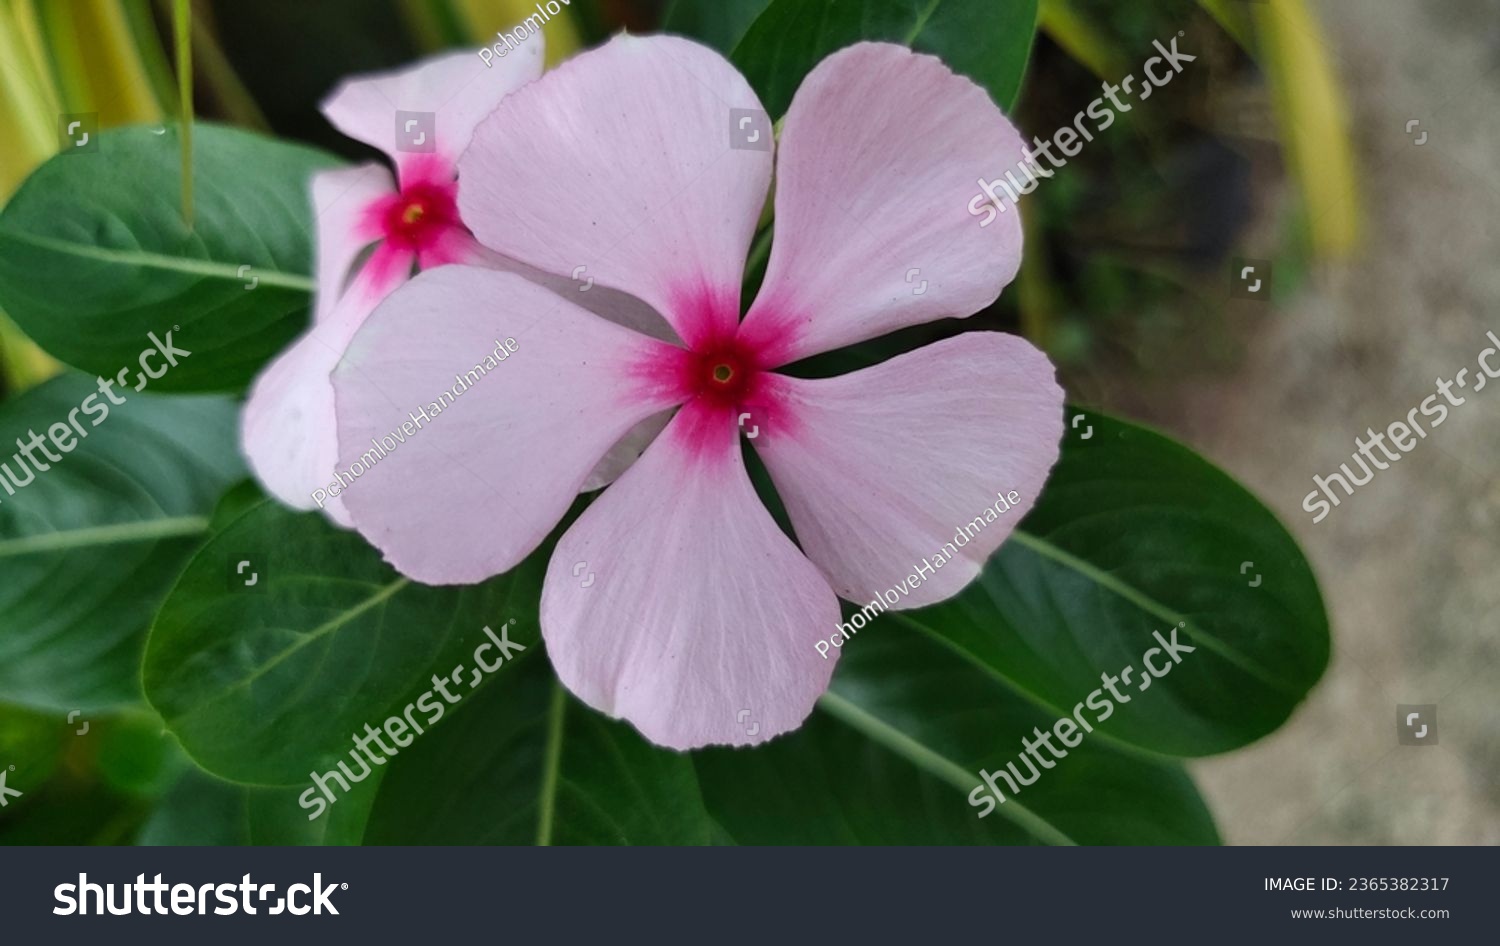 Madagascar periwinkle, Vinca,Old maid, Cayenne jasmine, Rose periwinkle, beautiful pink flower background. Five-pointed flower #2365382317